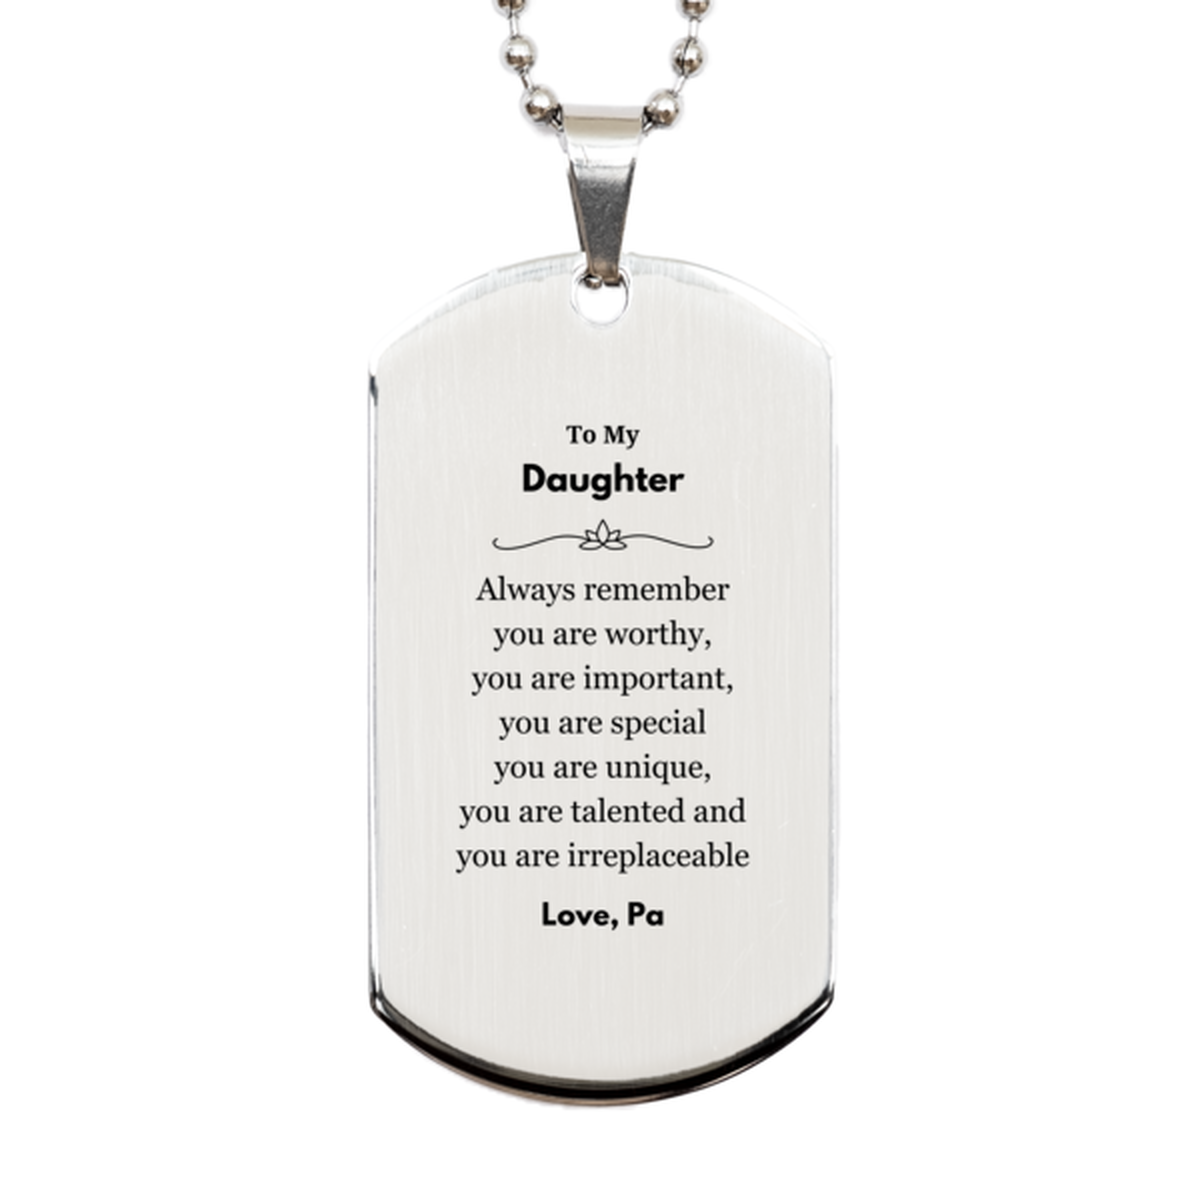 Daughter Birthday Gifts from Pa, Inspirational Silver Dog Tag for Daughter Christmas Graduation Gifts for Daughter Always remember you are worthy, you are important. Love, Pa